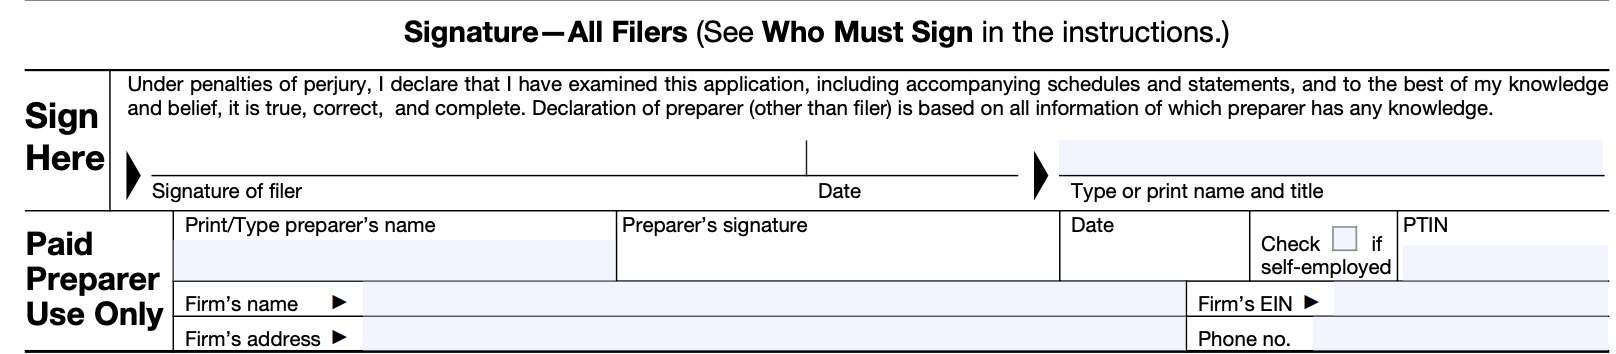 irs form 1128 signature section